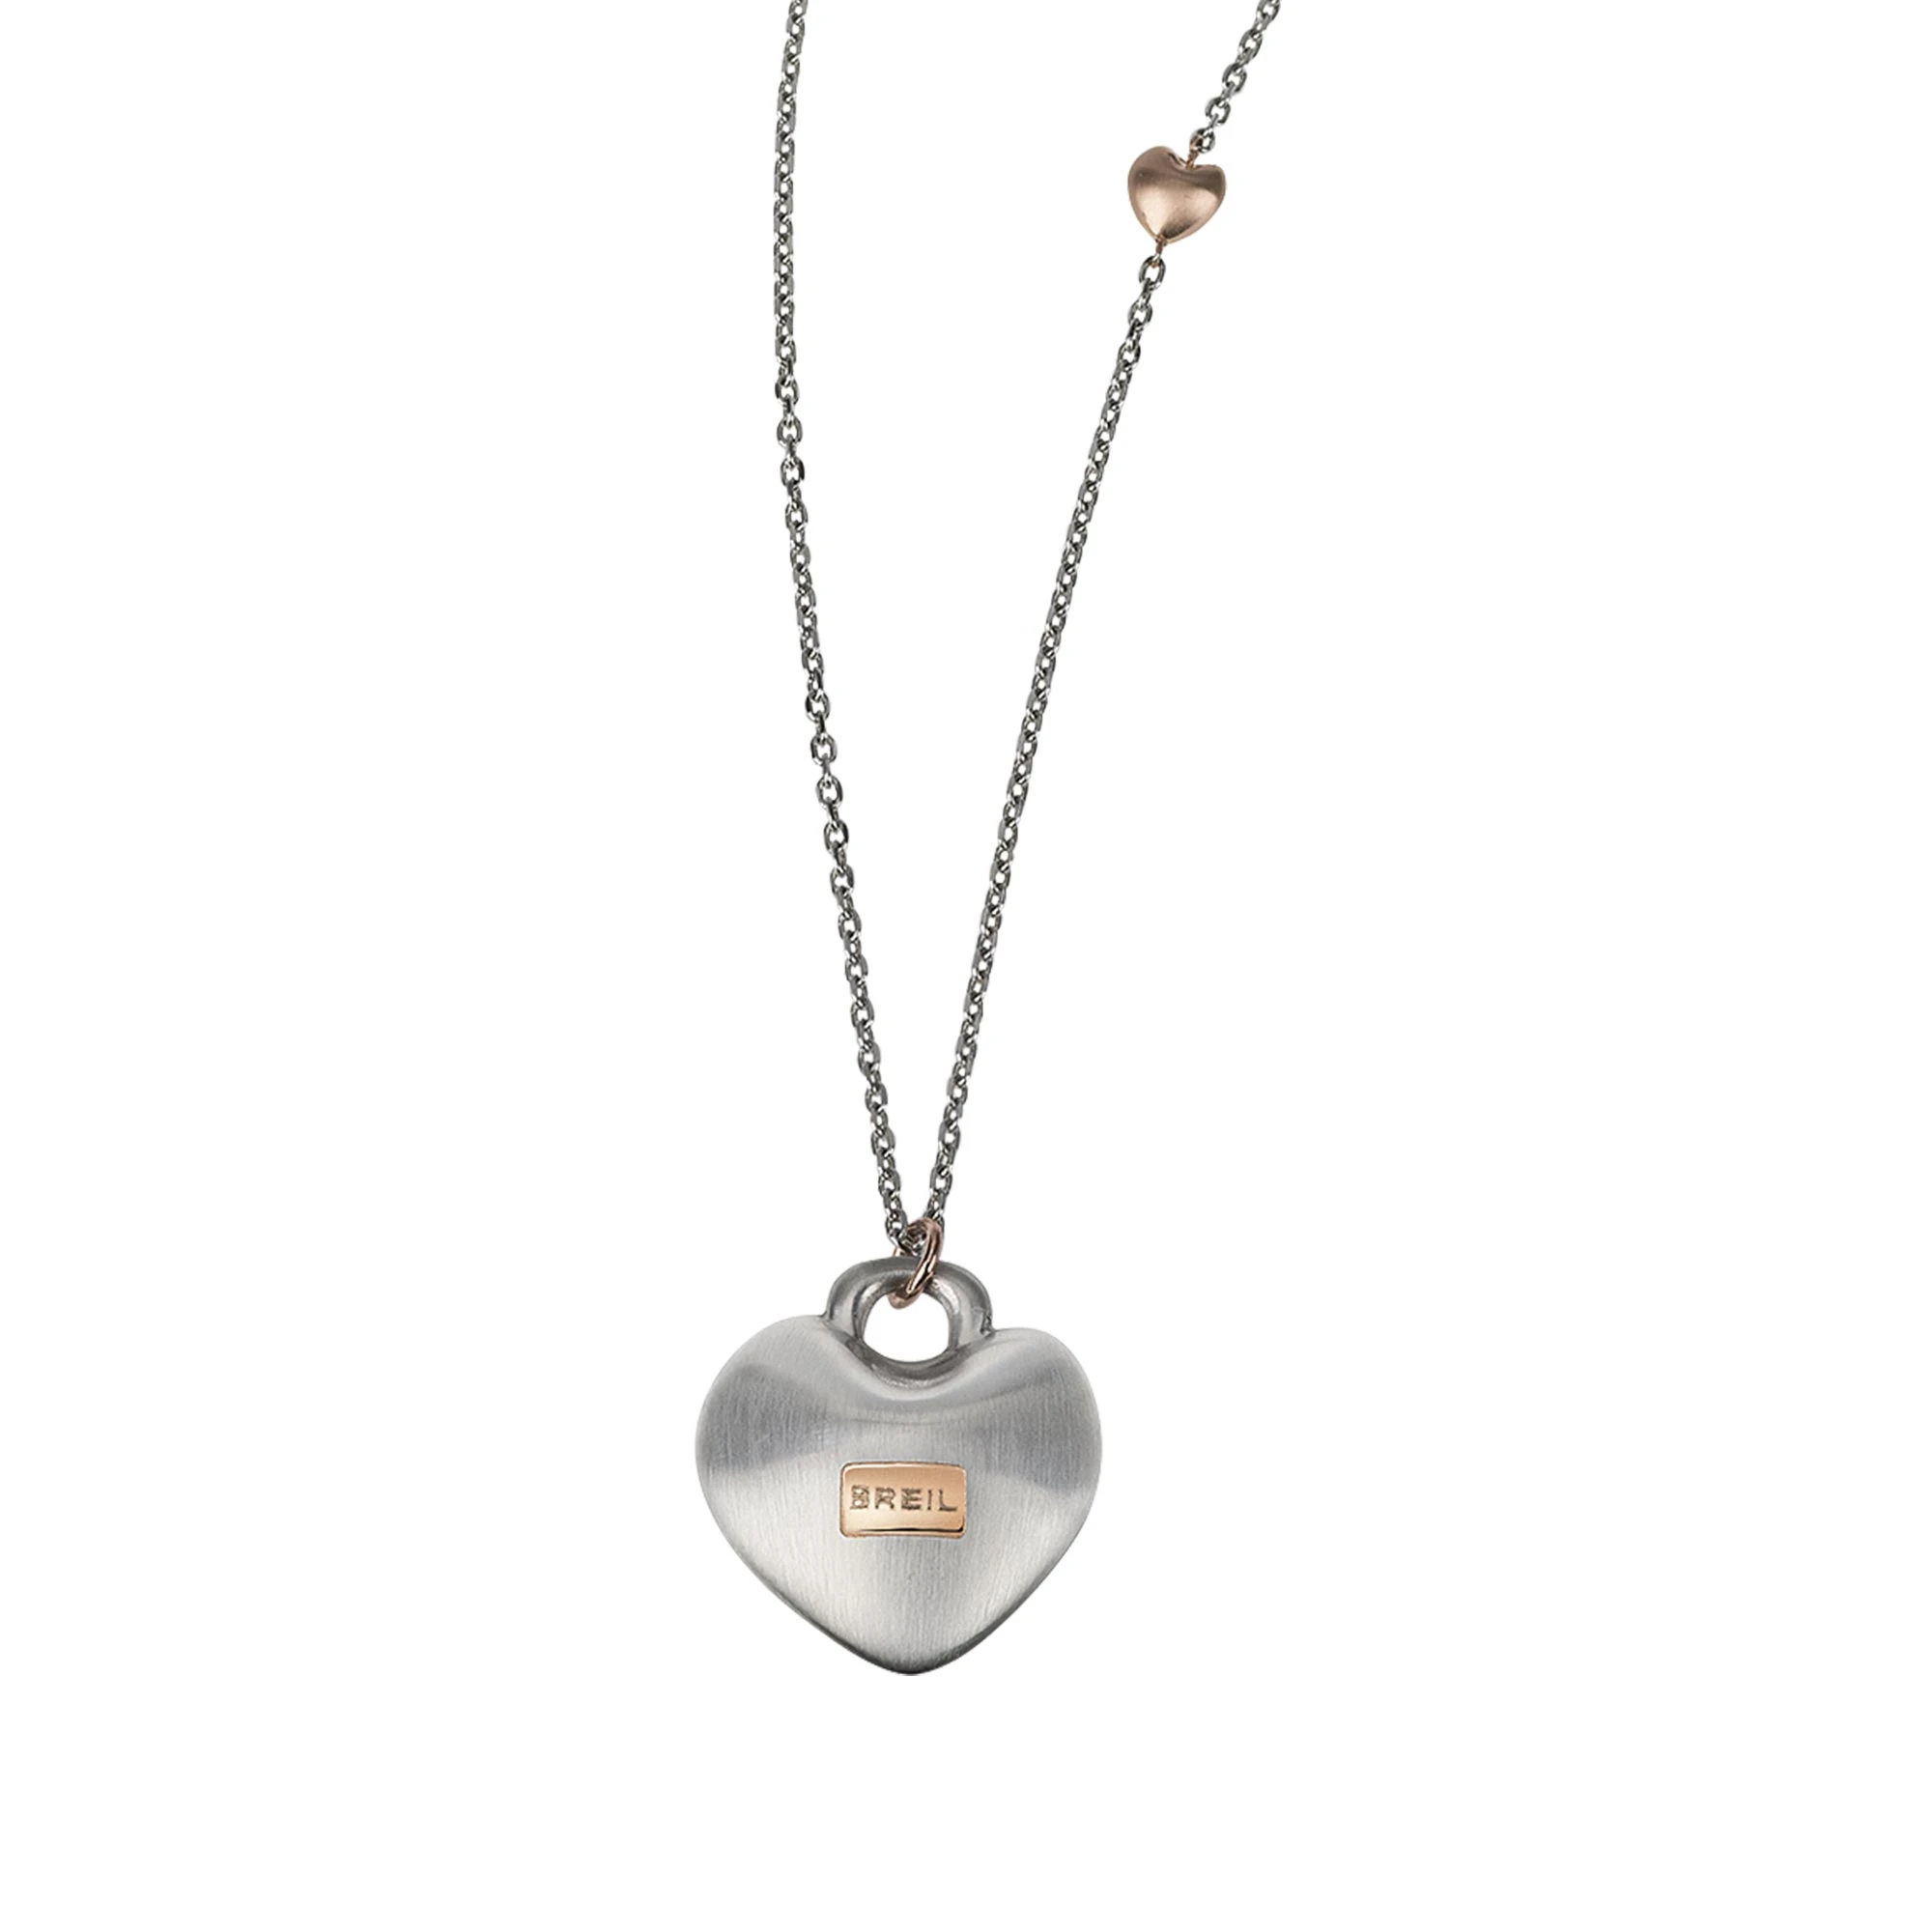 KILOS OF LOVE - STAINLESS STEEL LONG NECKLACE WITH PENDANT - 1 - TJ2735 | Breil